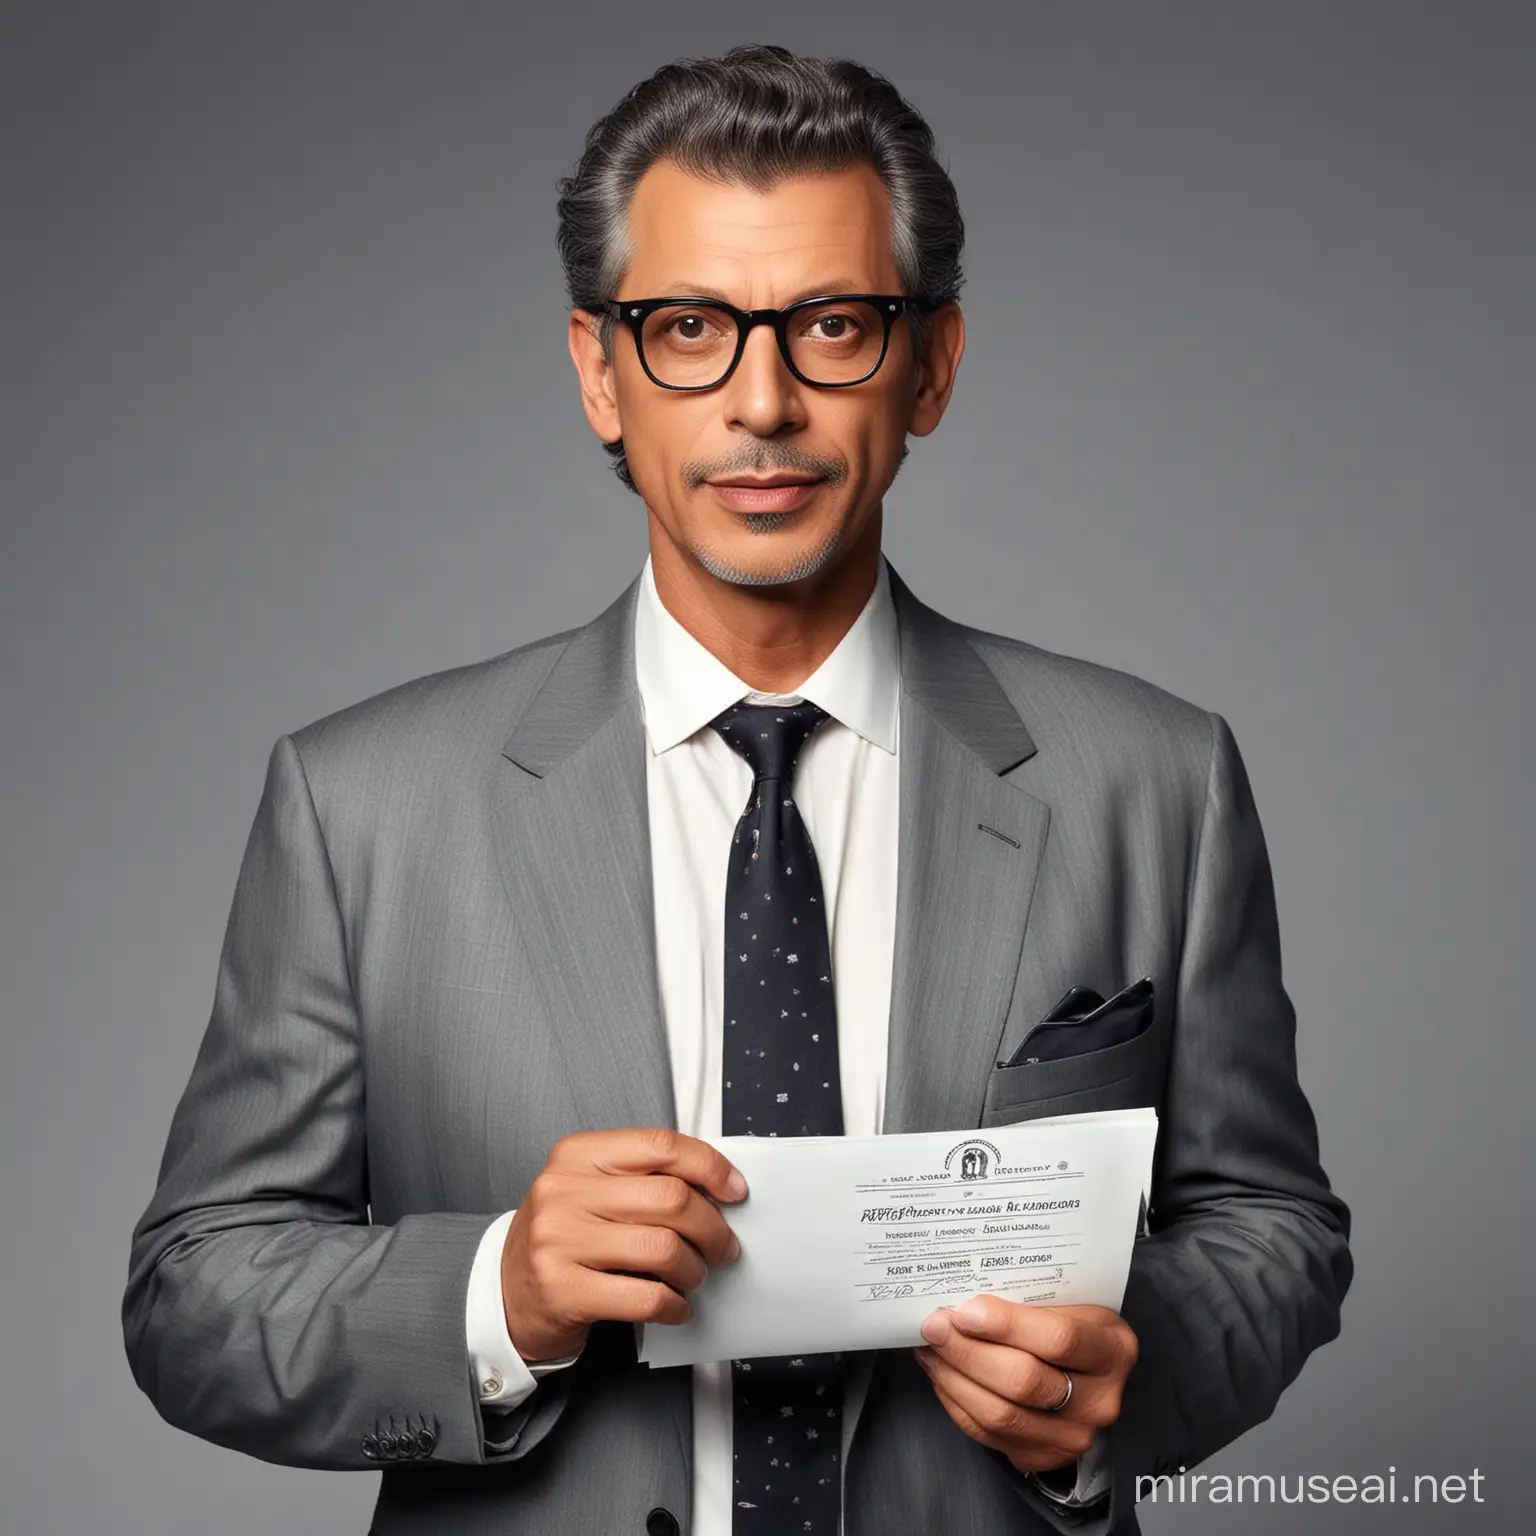 I want to see Jeff Goldblum as an accountant getting lots of certificates and professional development credits